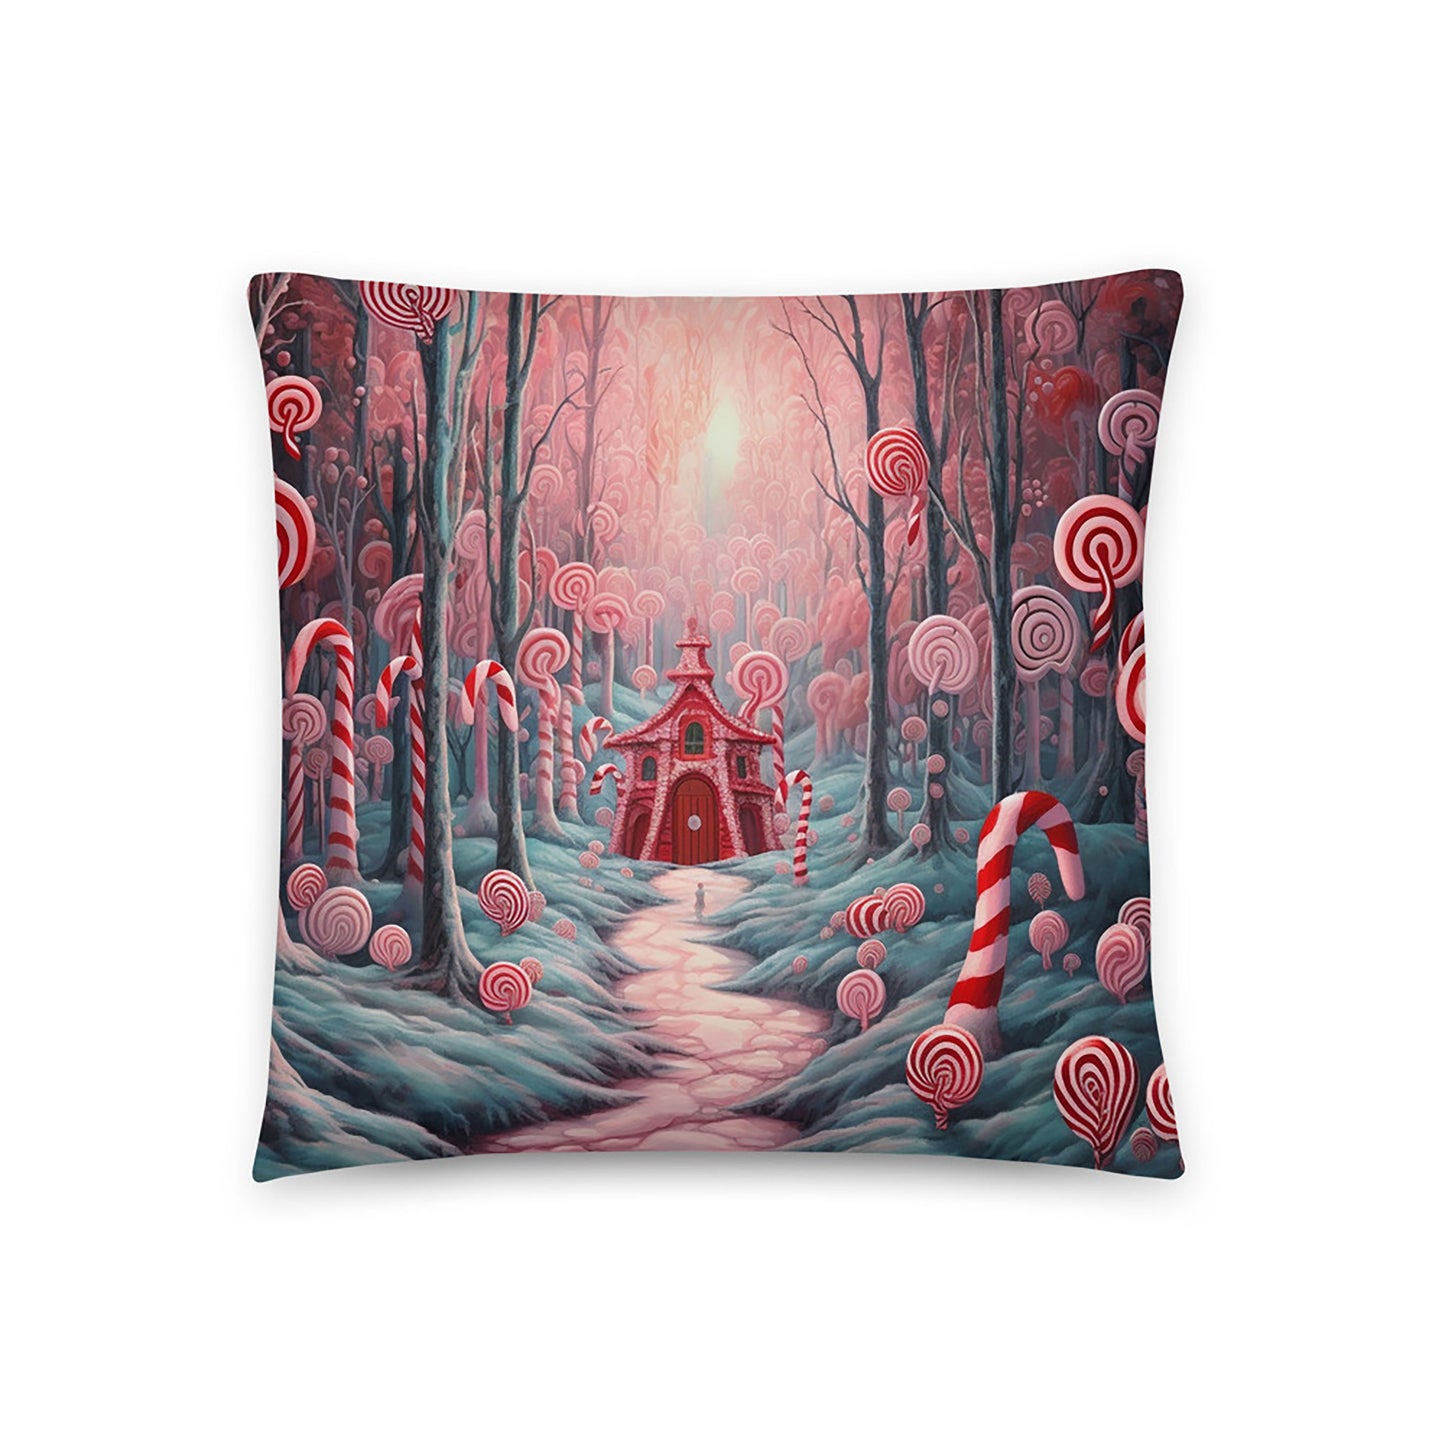 Christmas Throw Pillow Candy Cane Forest Festive Polyester Decorative Cushion 18x18